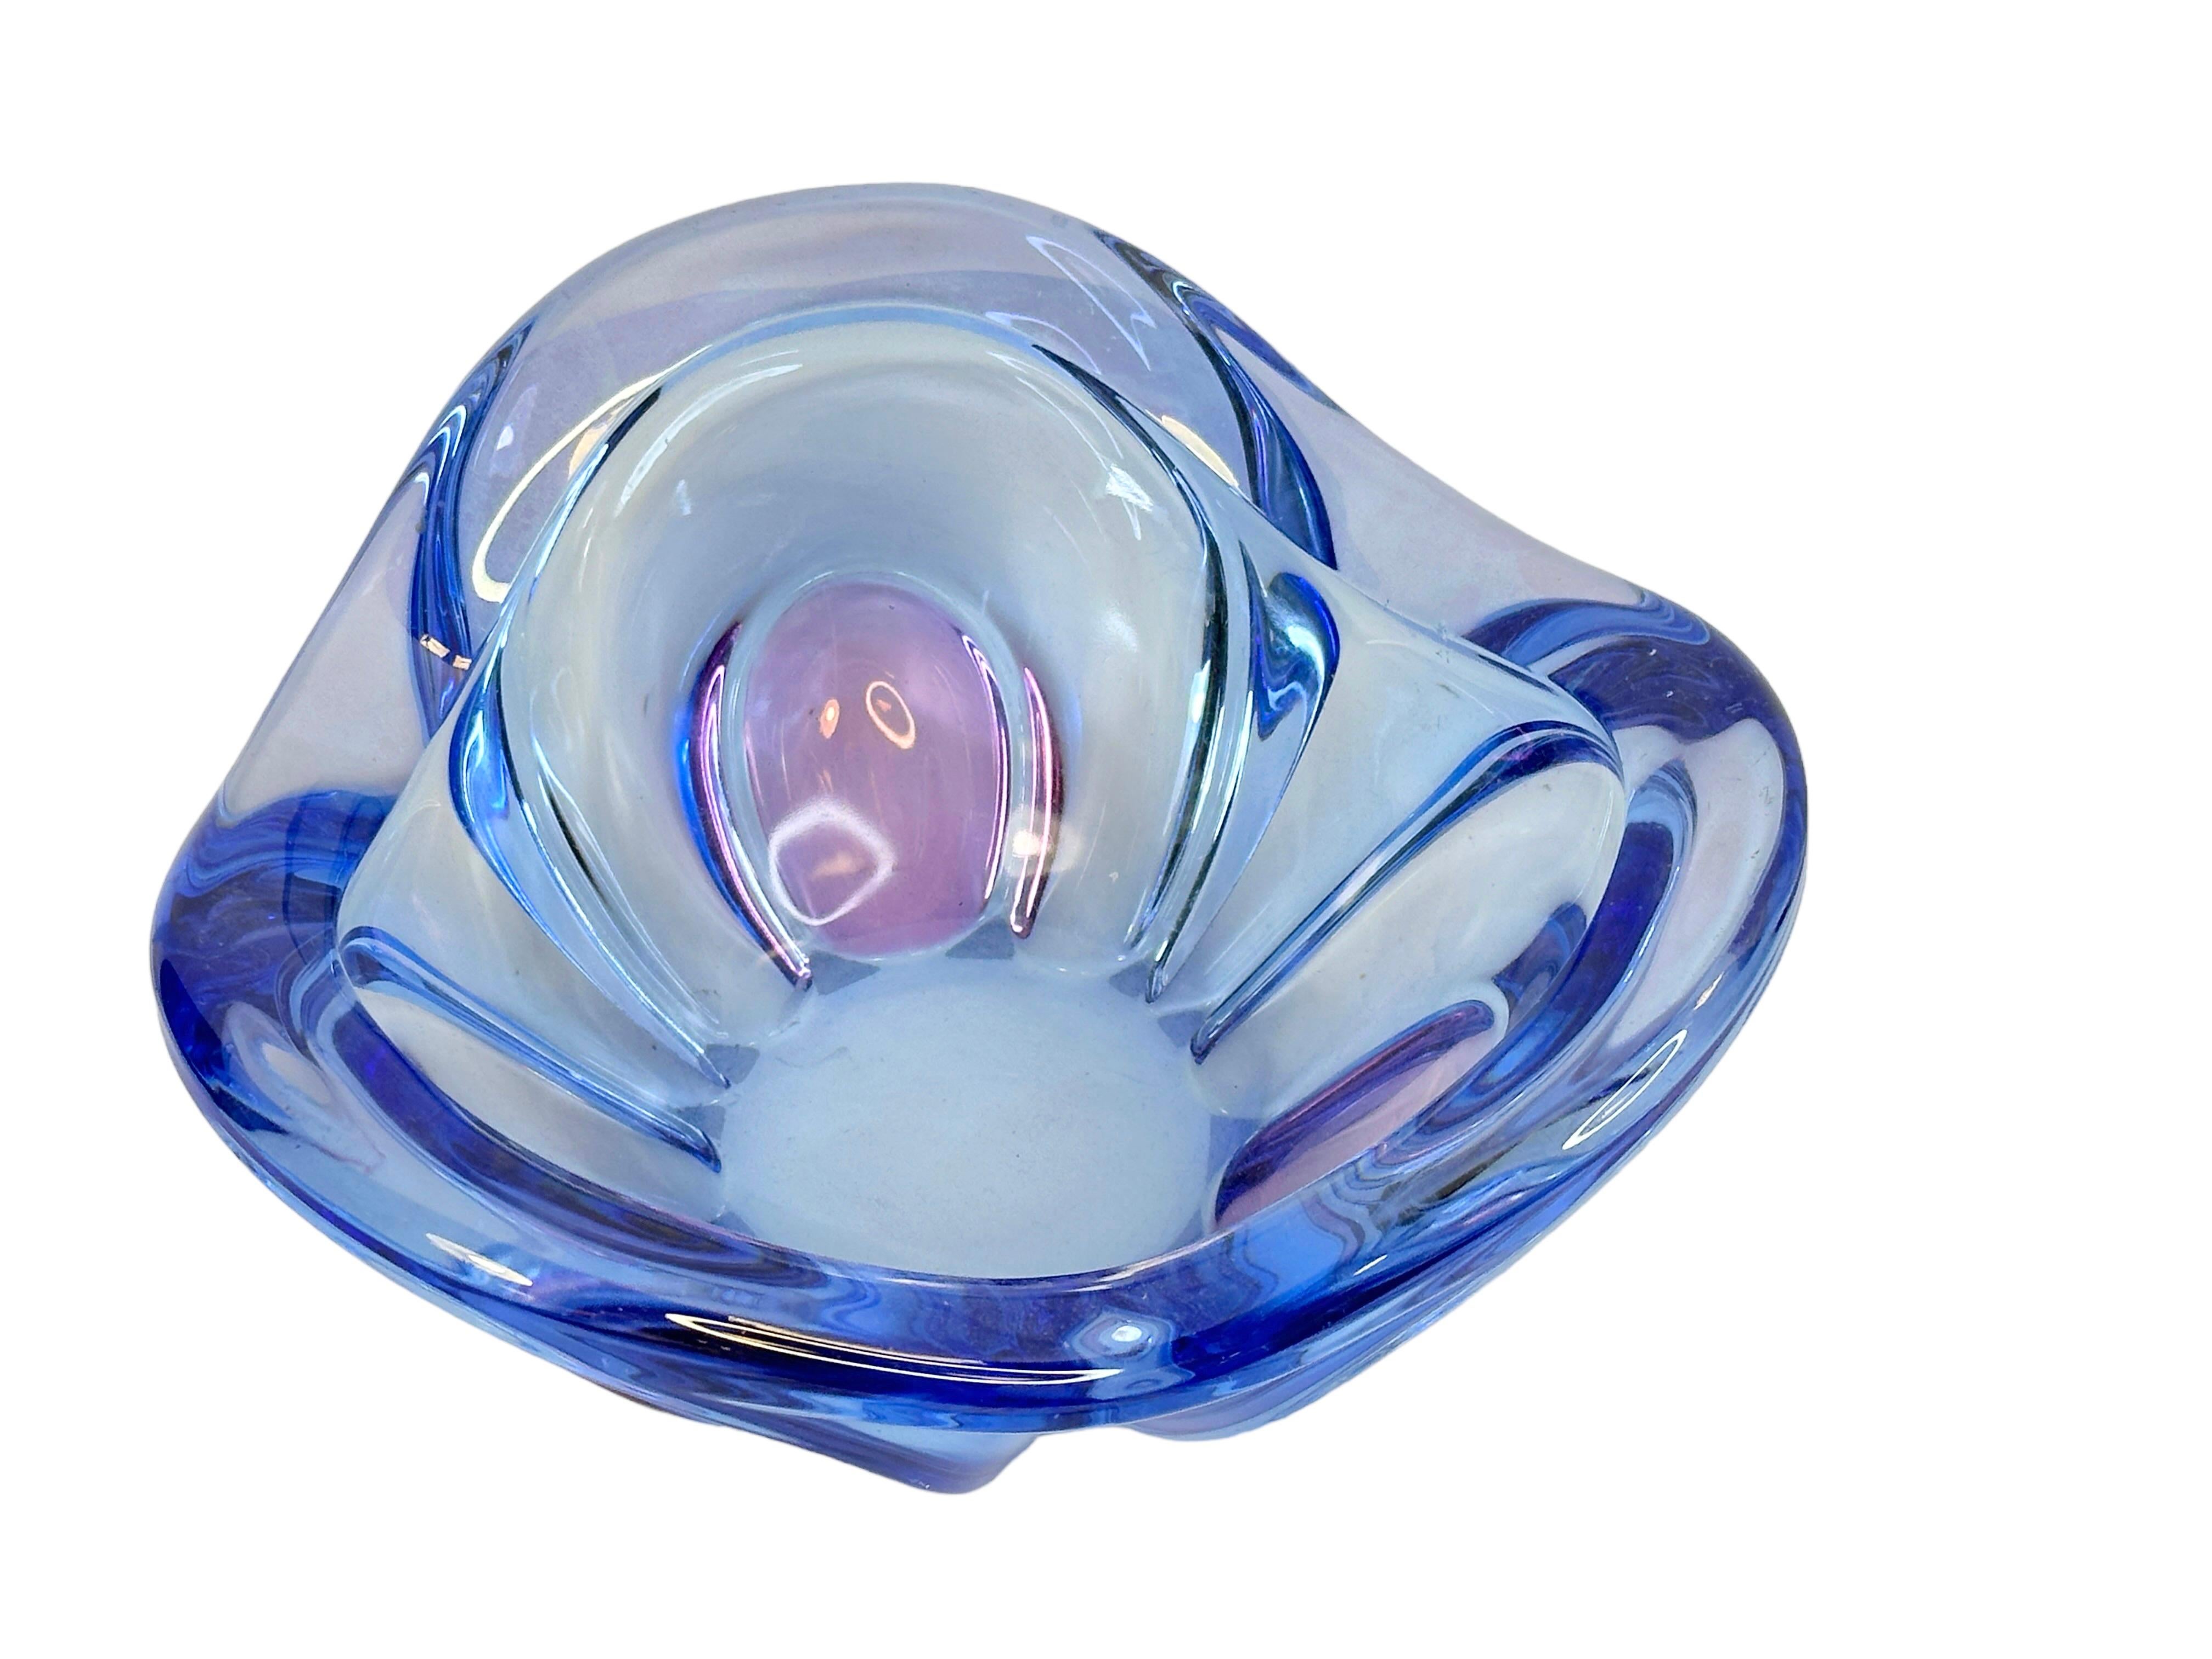 Hand-Crafted Beautiful Blue & Purple Murano Glass Bowl Catchall Vintage, Italy, 1970s For Sale